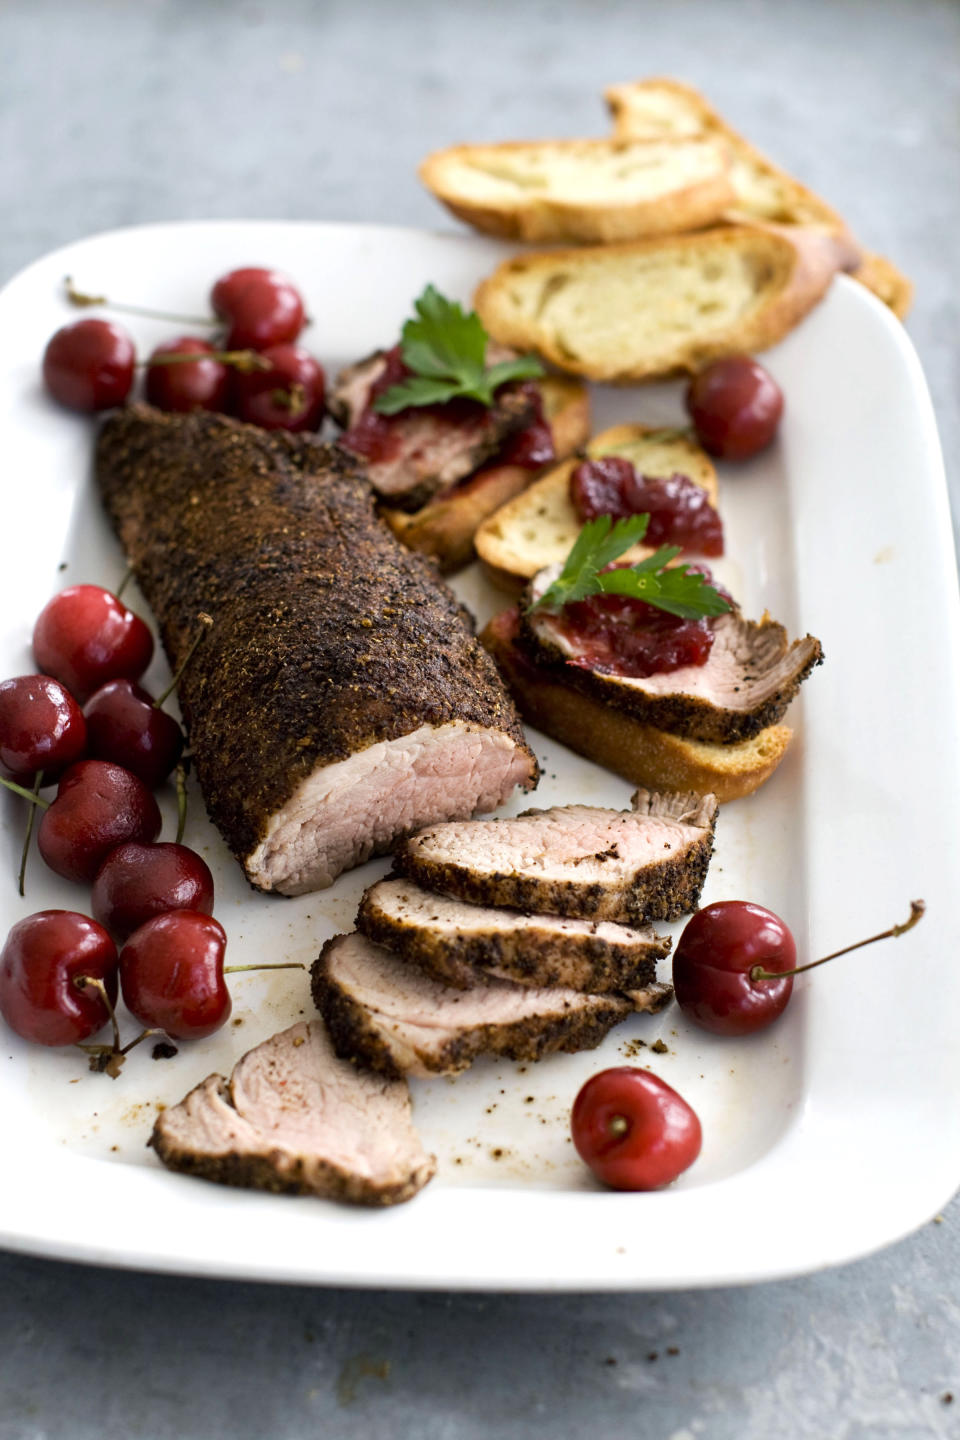 In this image taken on Jan. 28, 2013, cherry-topped coffee-roasted pork tenderloin is shown served on a platter in Concord, N.H. (AP Photo: Matthew Mead)